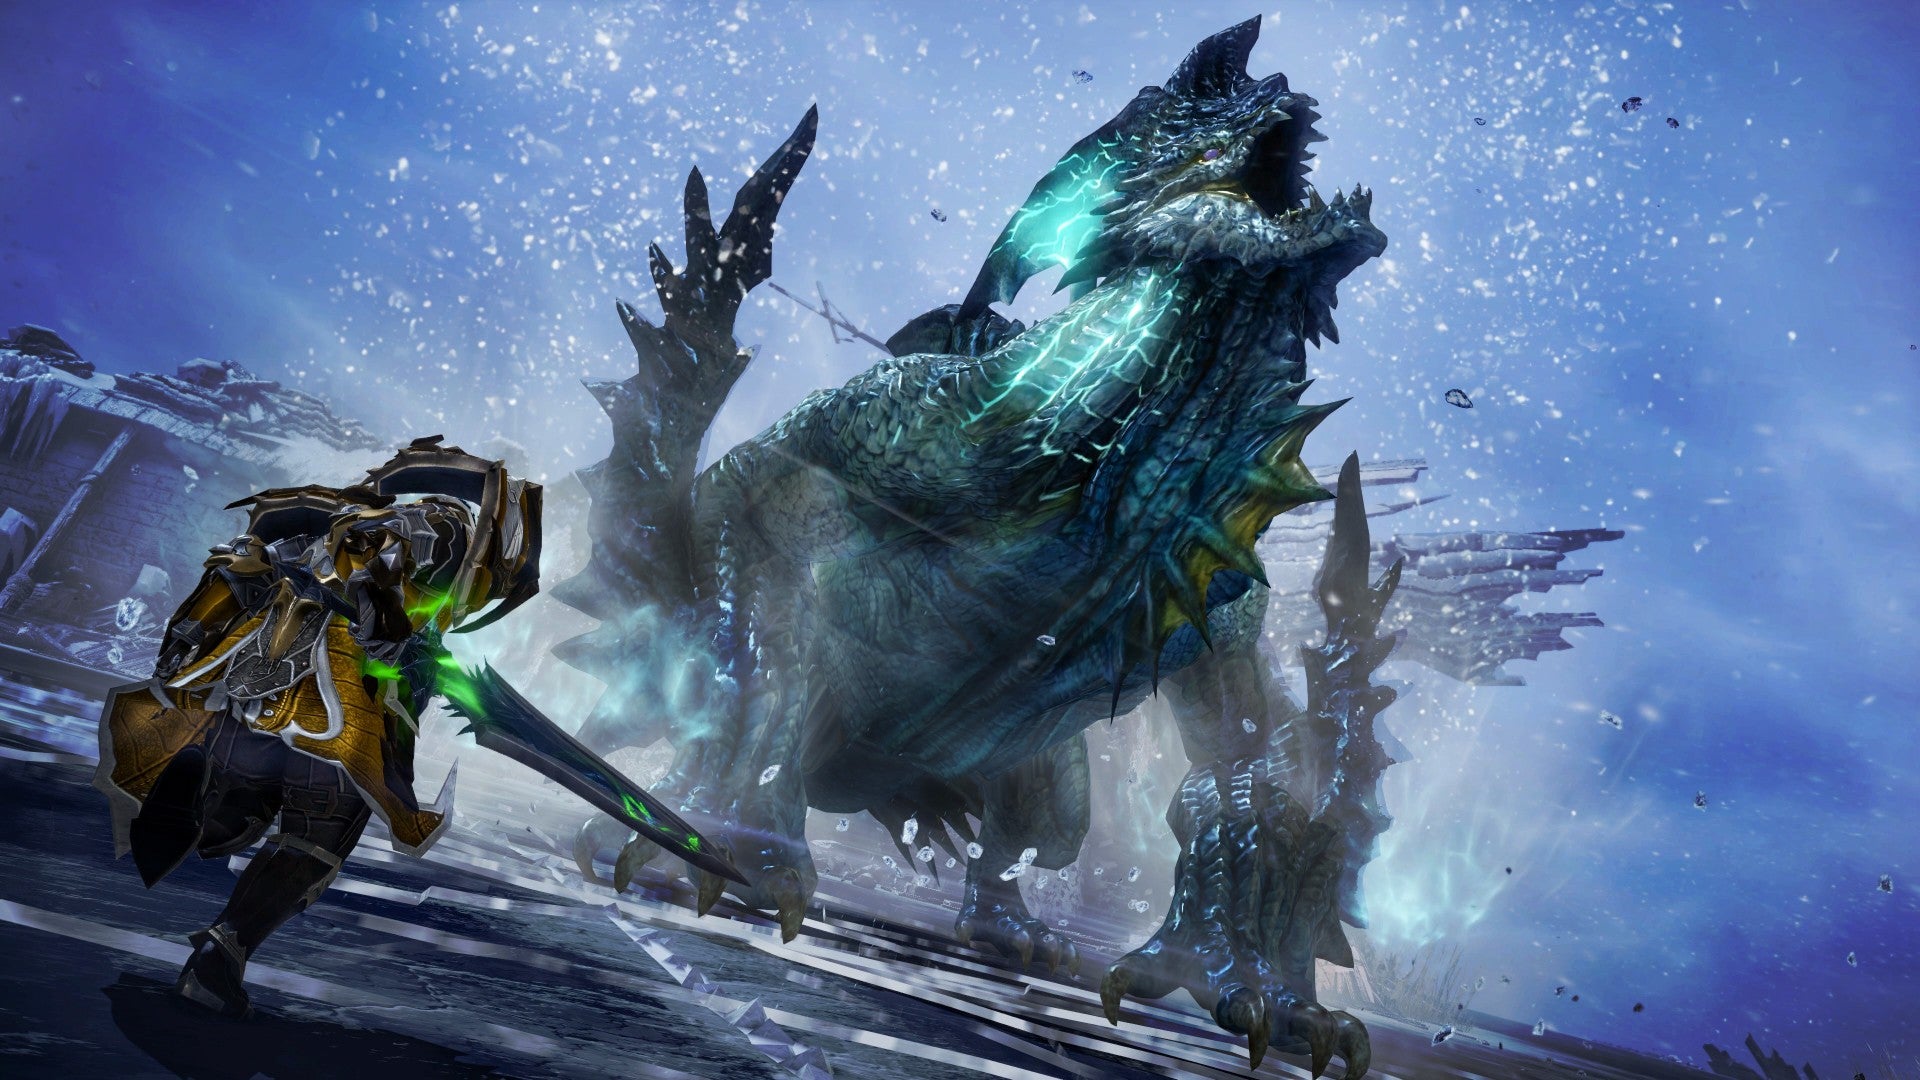 Lost Ark player fighting a dragon-like monster in the snow.